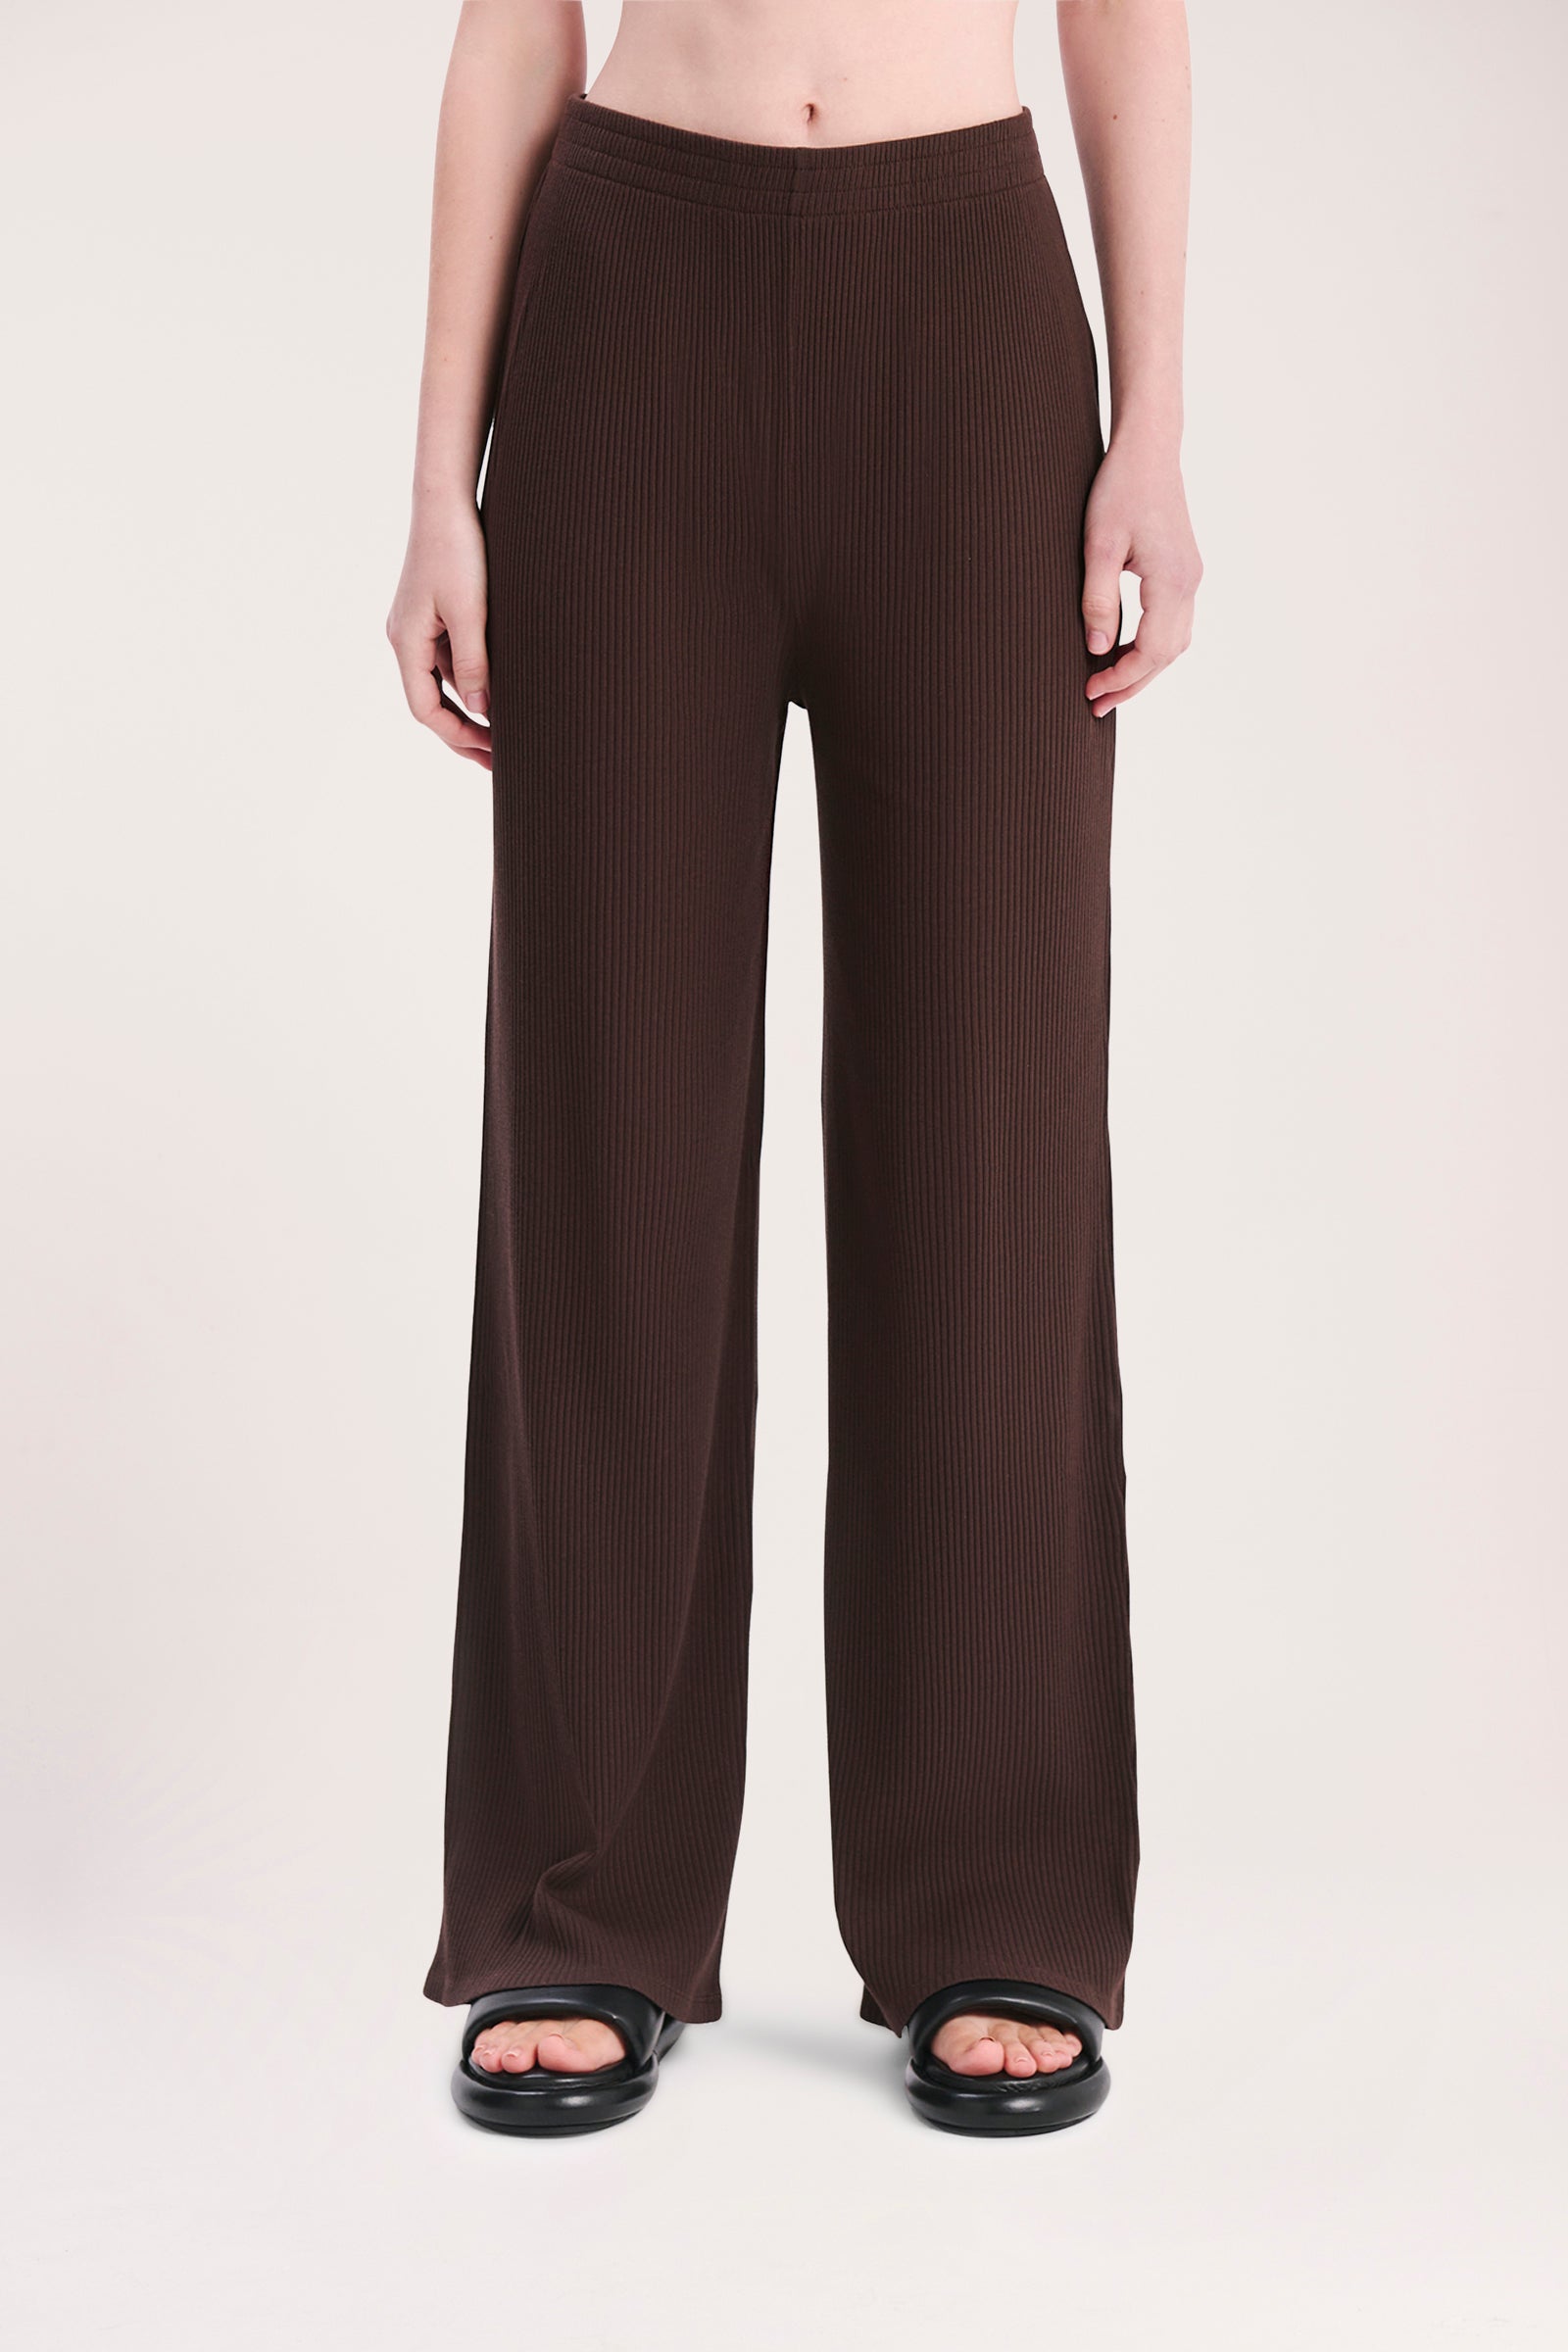 Nude Lucy Nude Lounge Ribbed Pant In A Brown Cinder Colour